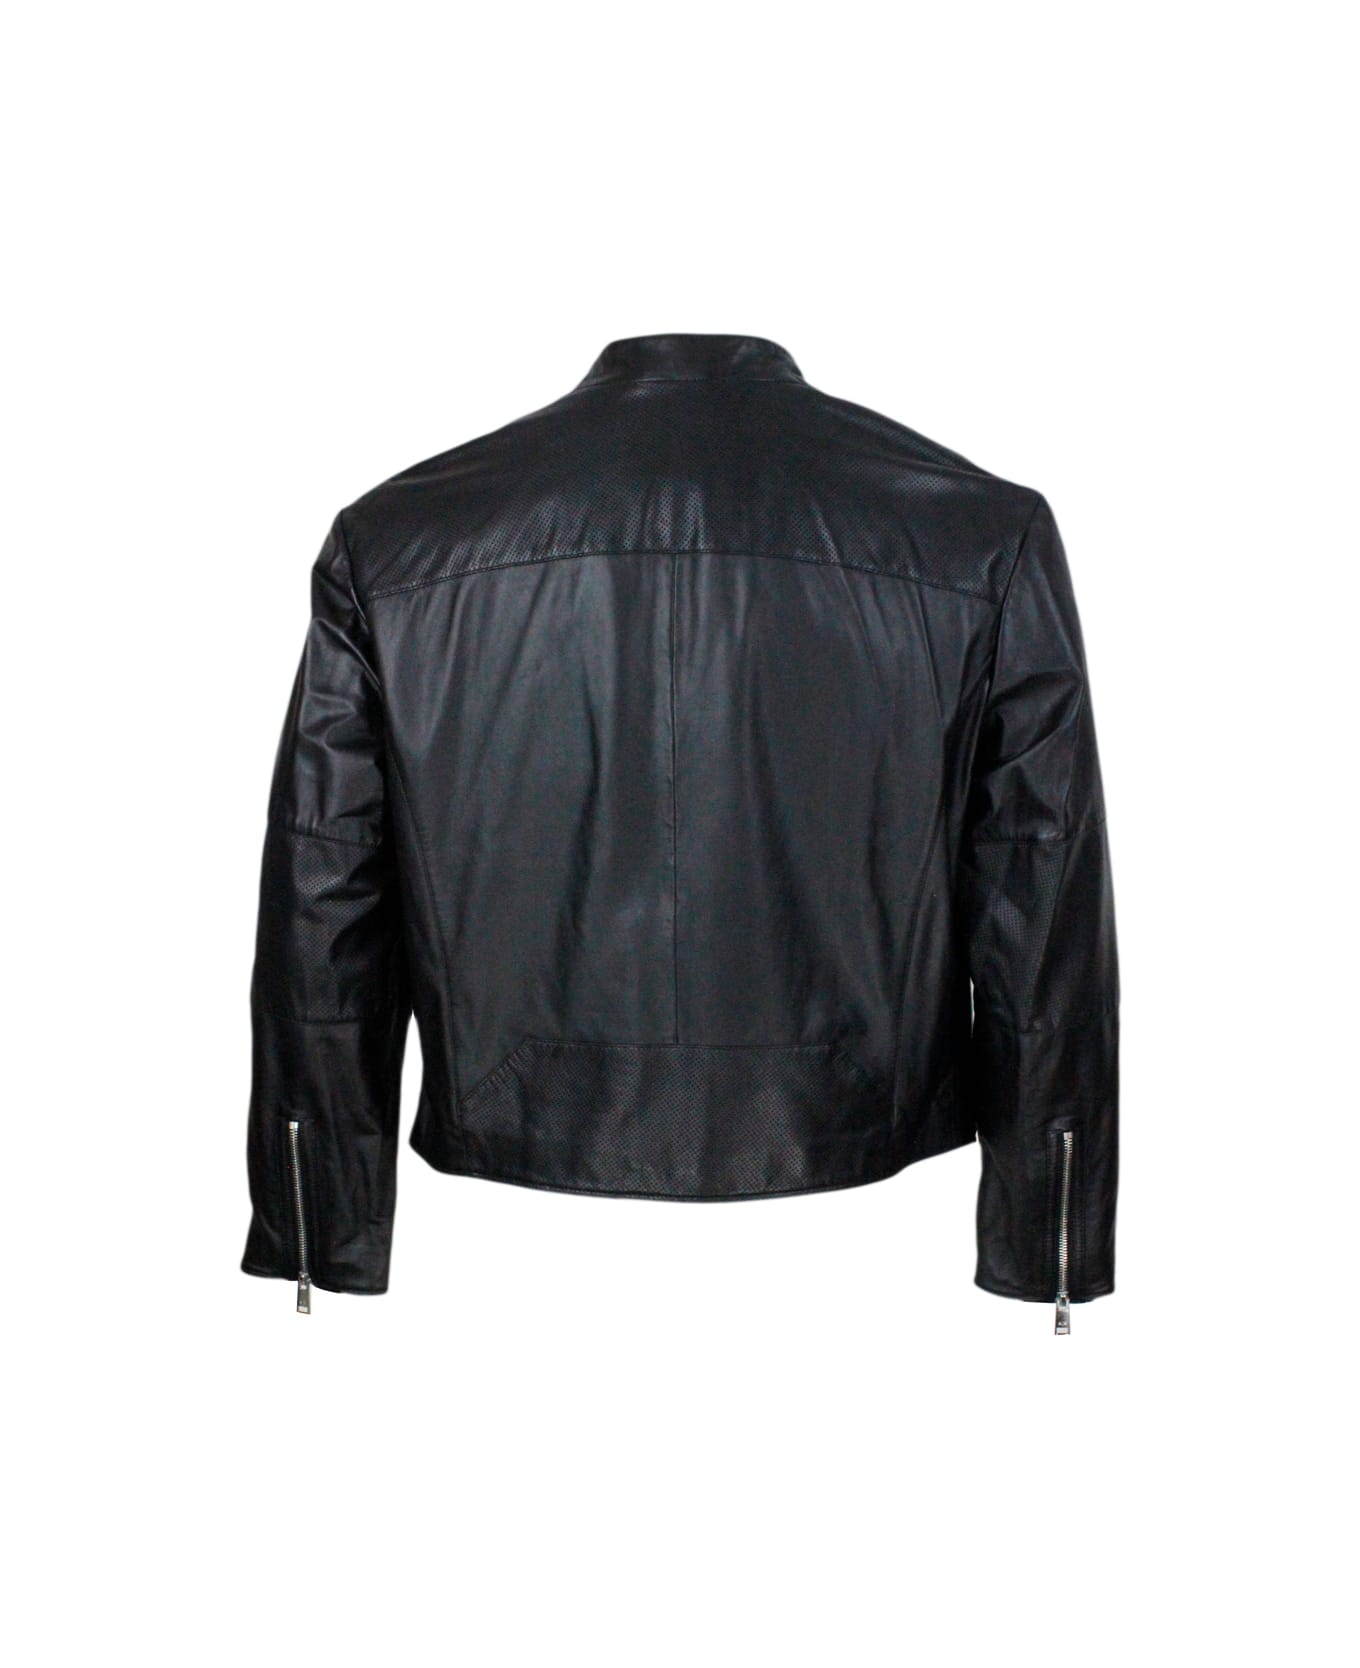 Armani Collezioni Jacket With Zip Closure Made Of Soft Lambskin With Perforated Leather Details. Zip On Pockets And Cuffs - Black